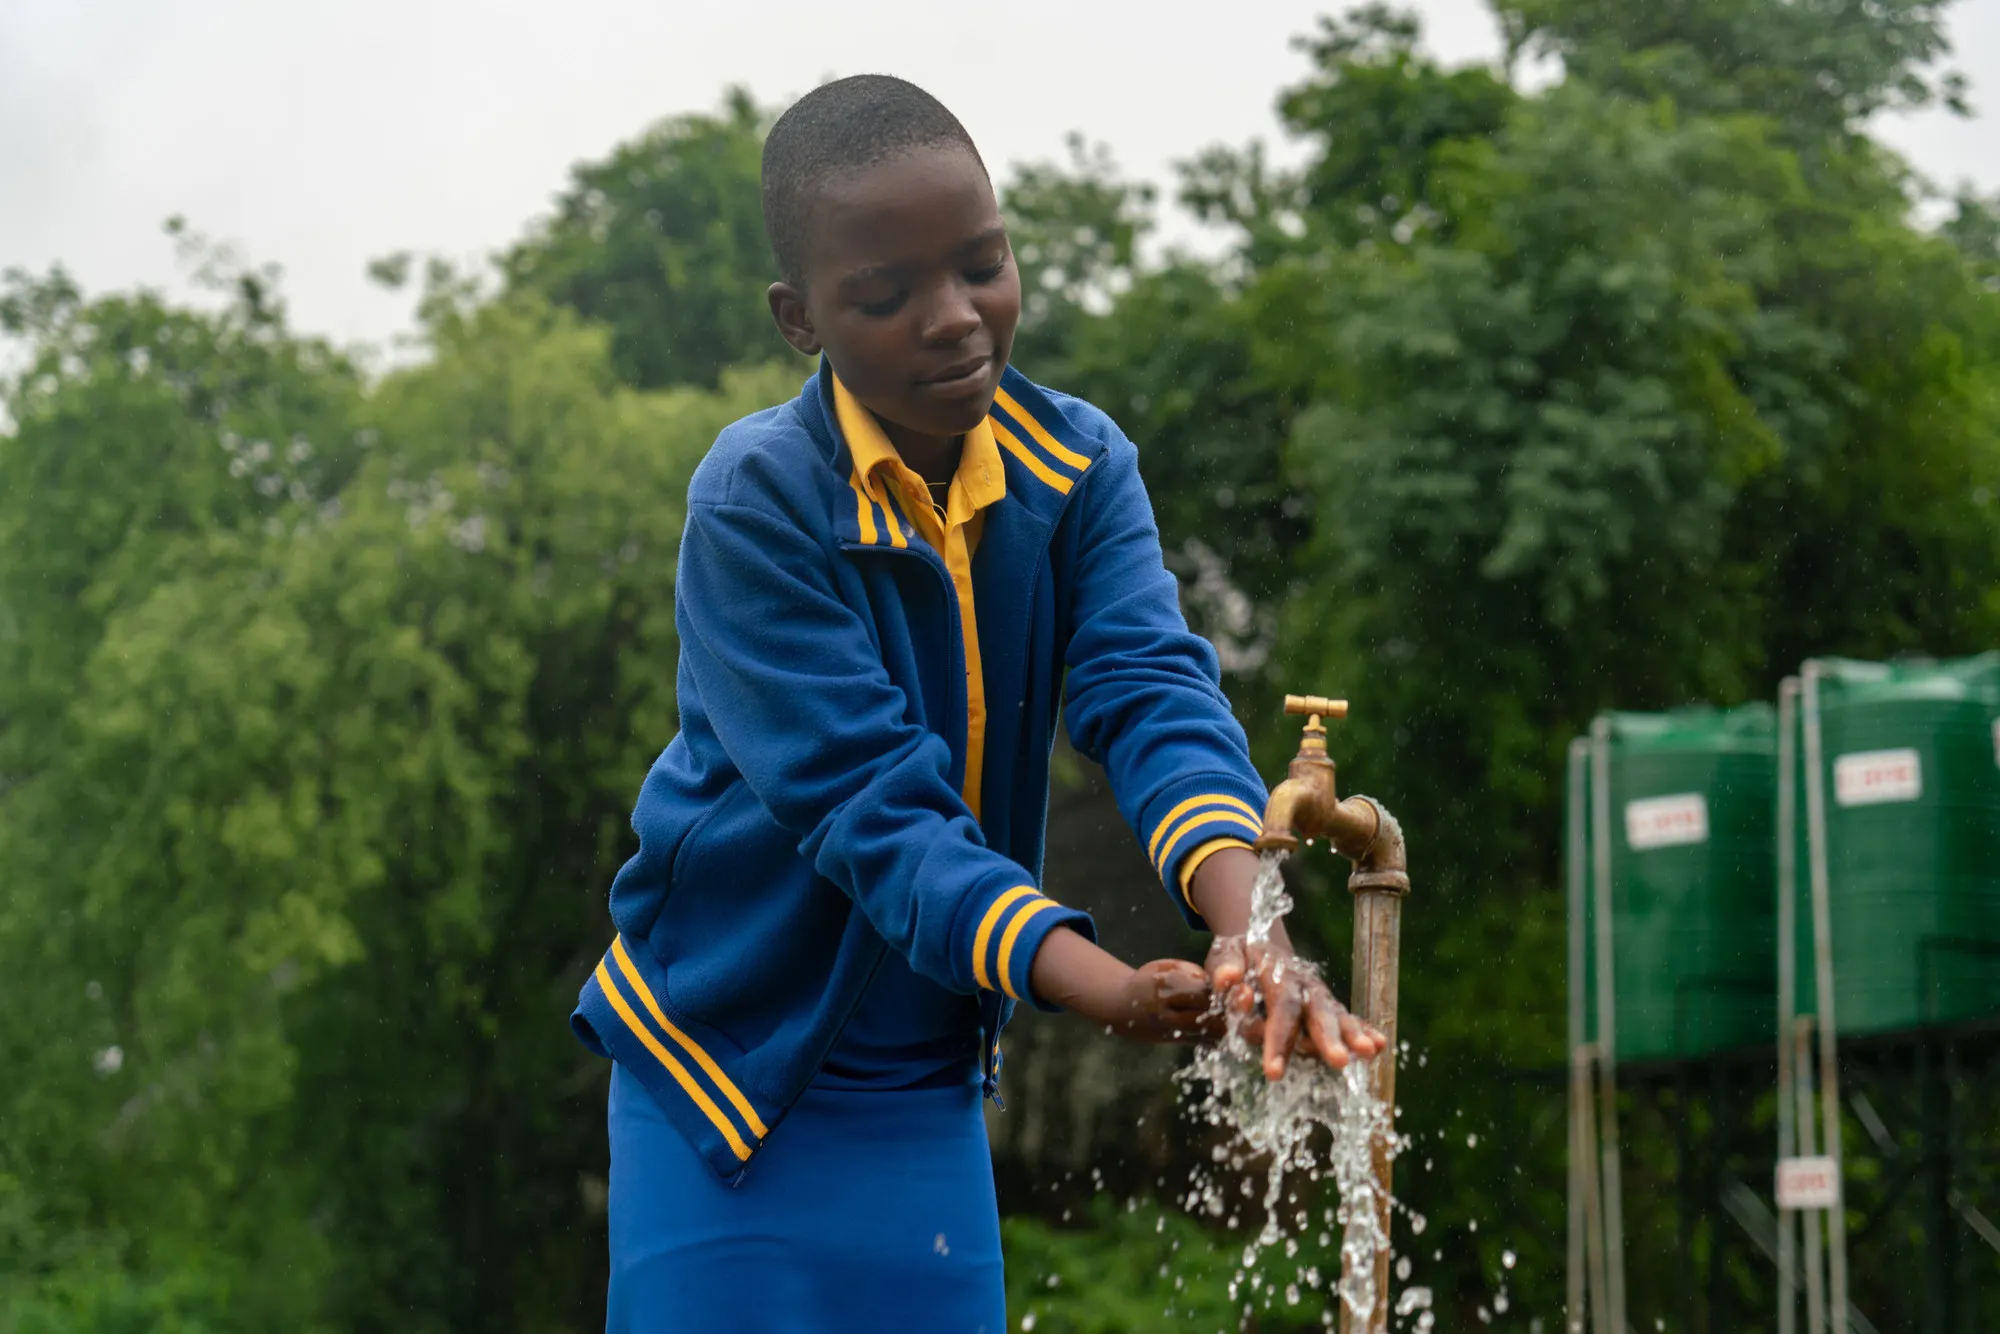 A hand-washing station at a school in Zimbabwe. Photo: © Lucy Beck/CARE